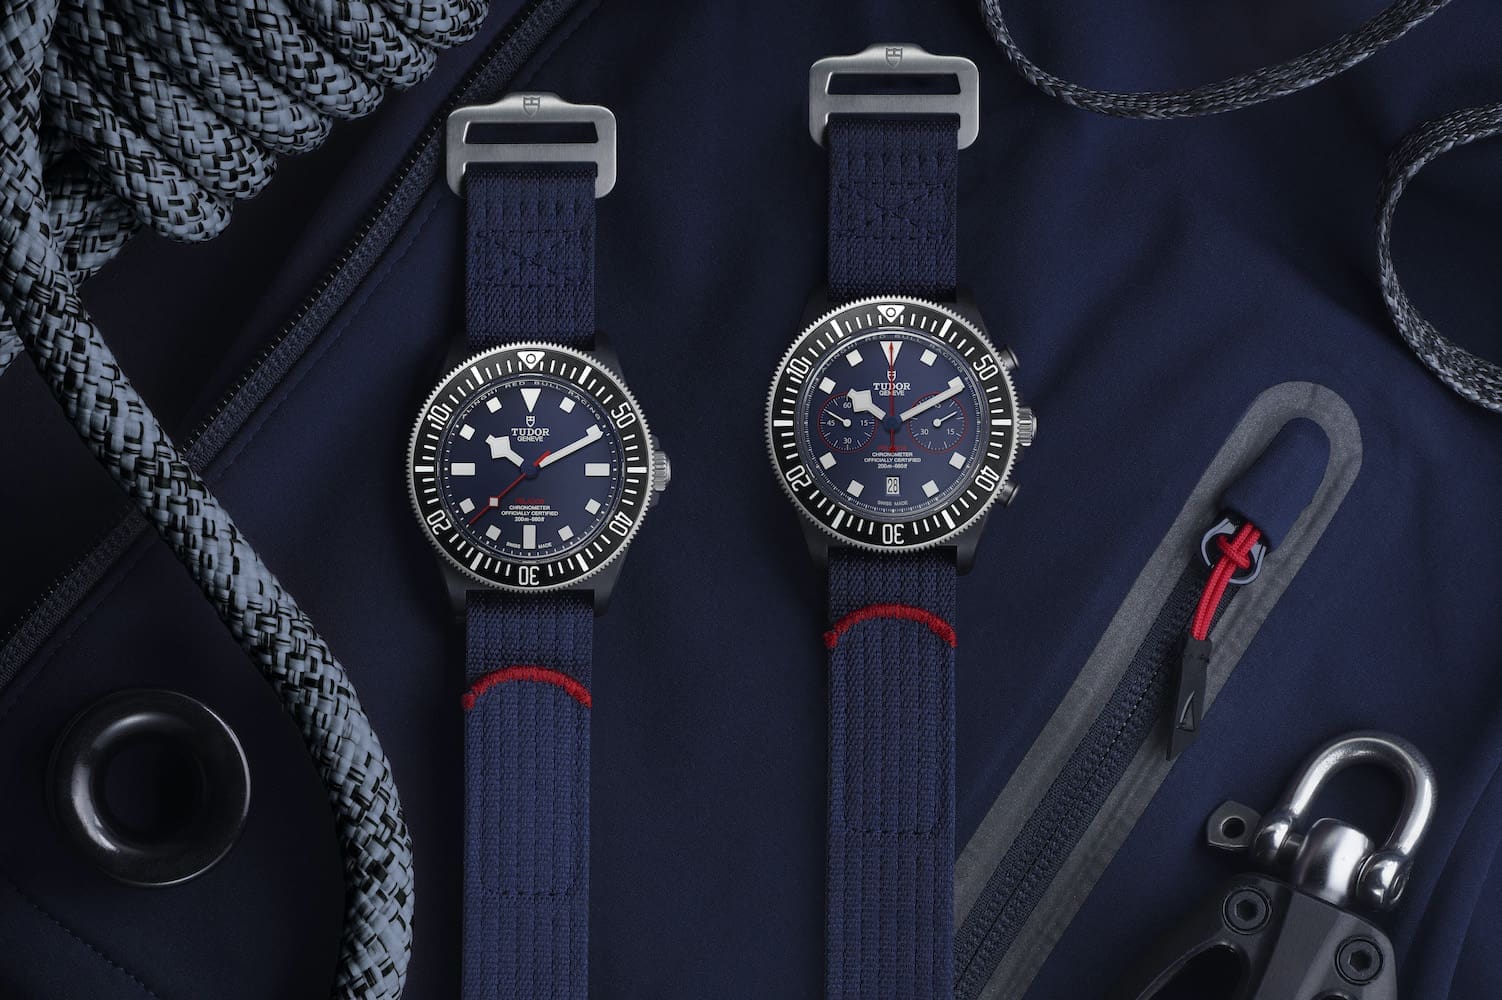 I always thought of the FXD as one watch. The new Tudor Pelagos FXD Alinghi Red Bull Racing Editions show how the FXD can be so much more…